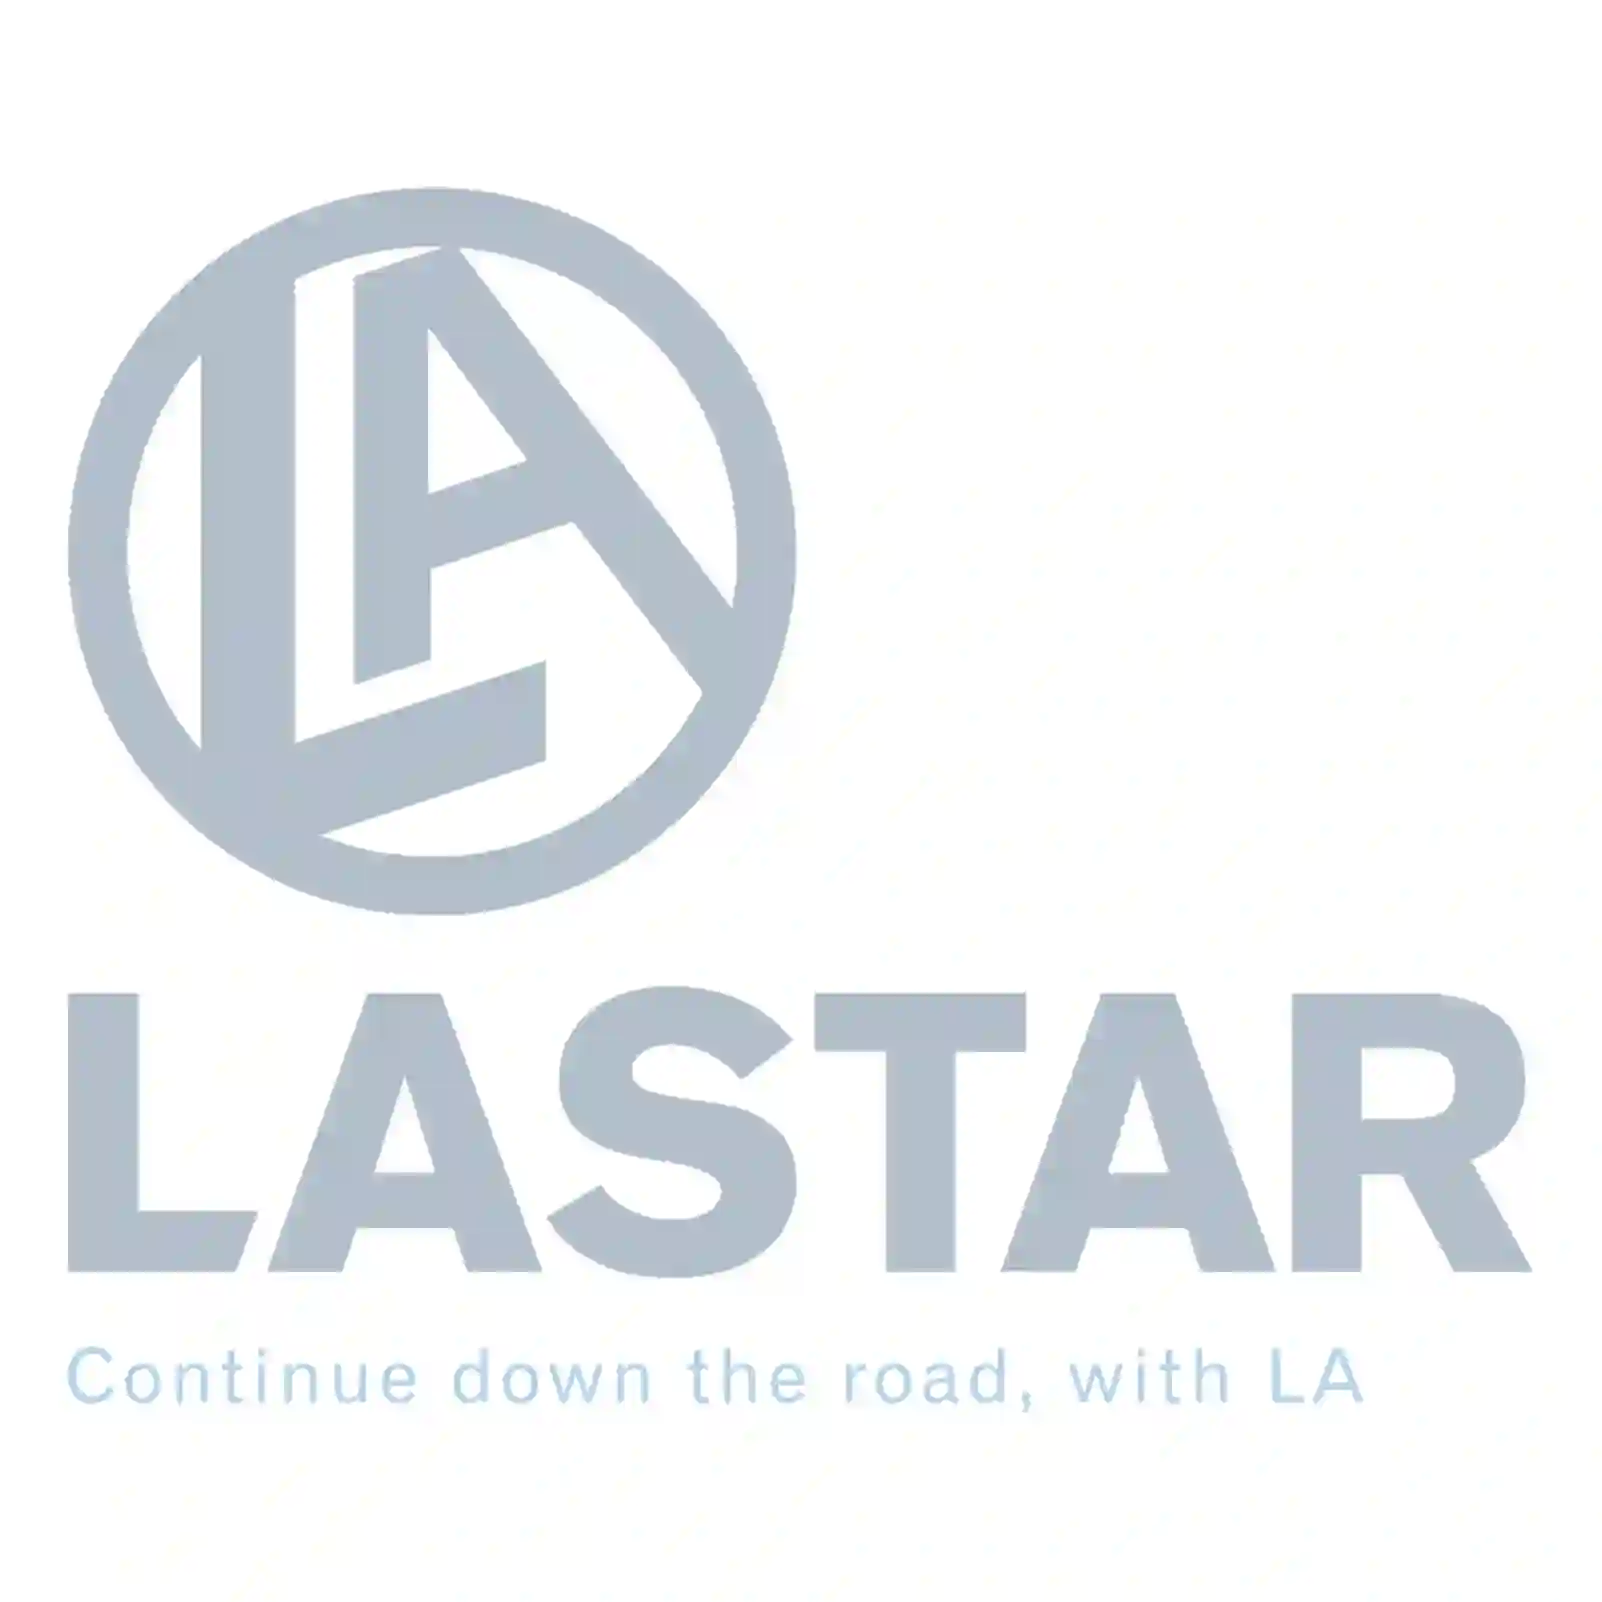  Step, center, right || Lastar Spare Part | Truck Spare Parts, Auotomotive Spare Parts